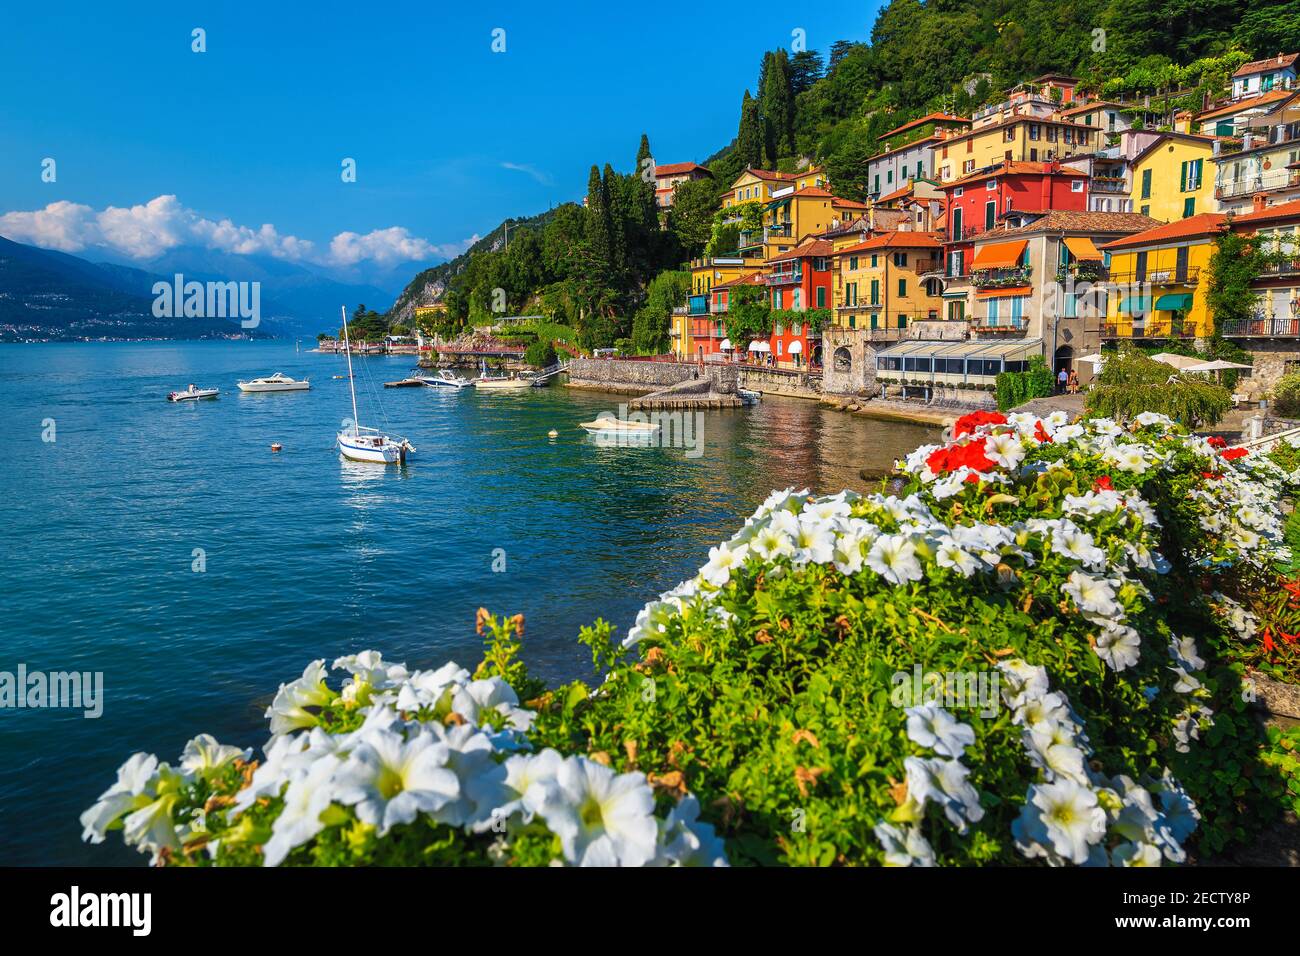 Flowery fence and colorful mediterranean buildings on the waterfront. Anchored boats in the harbor of Varenna, lake Como, Lombardy, Italy, Europe Stock Photo